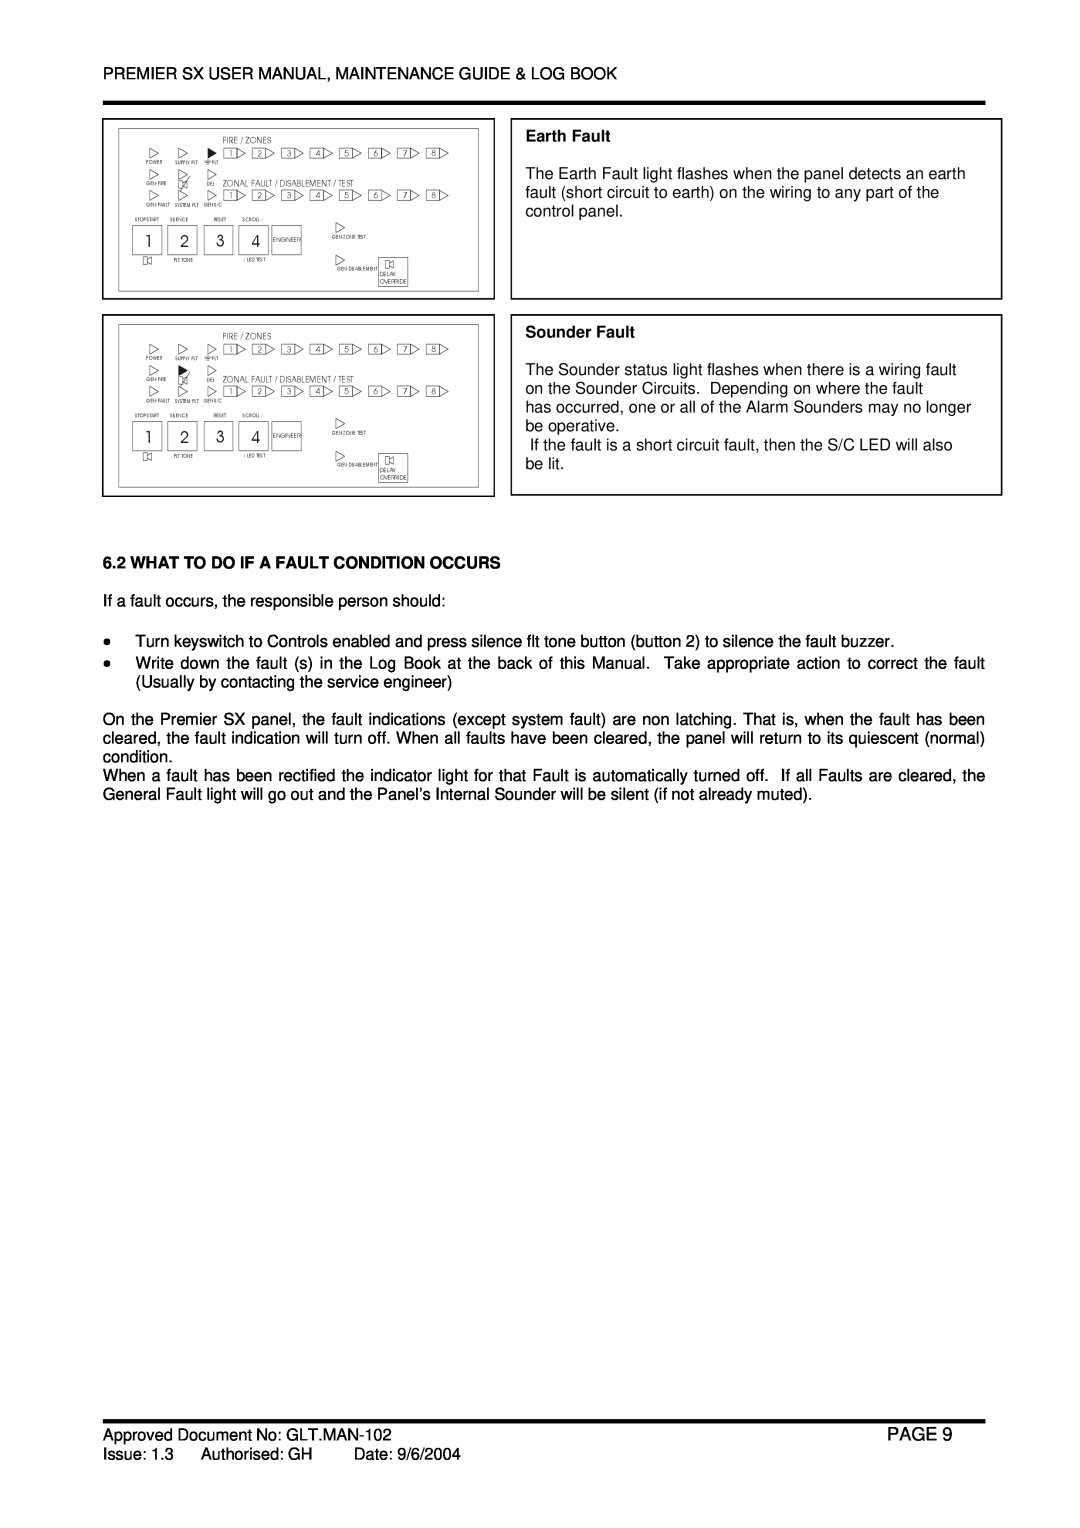 Premier Fire Alarm Control Panel user manual Page, Earth Fault, Sounder Fault, What To Do If A Fault Condition Occurs 